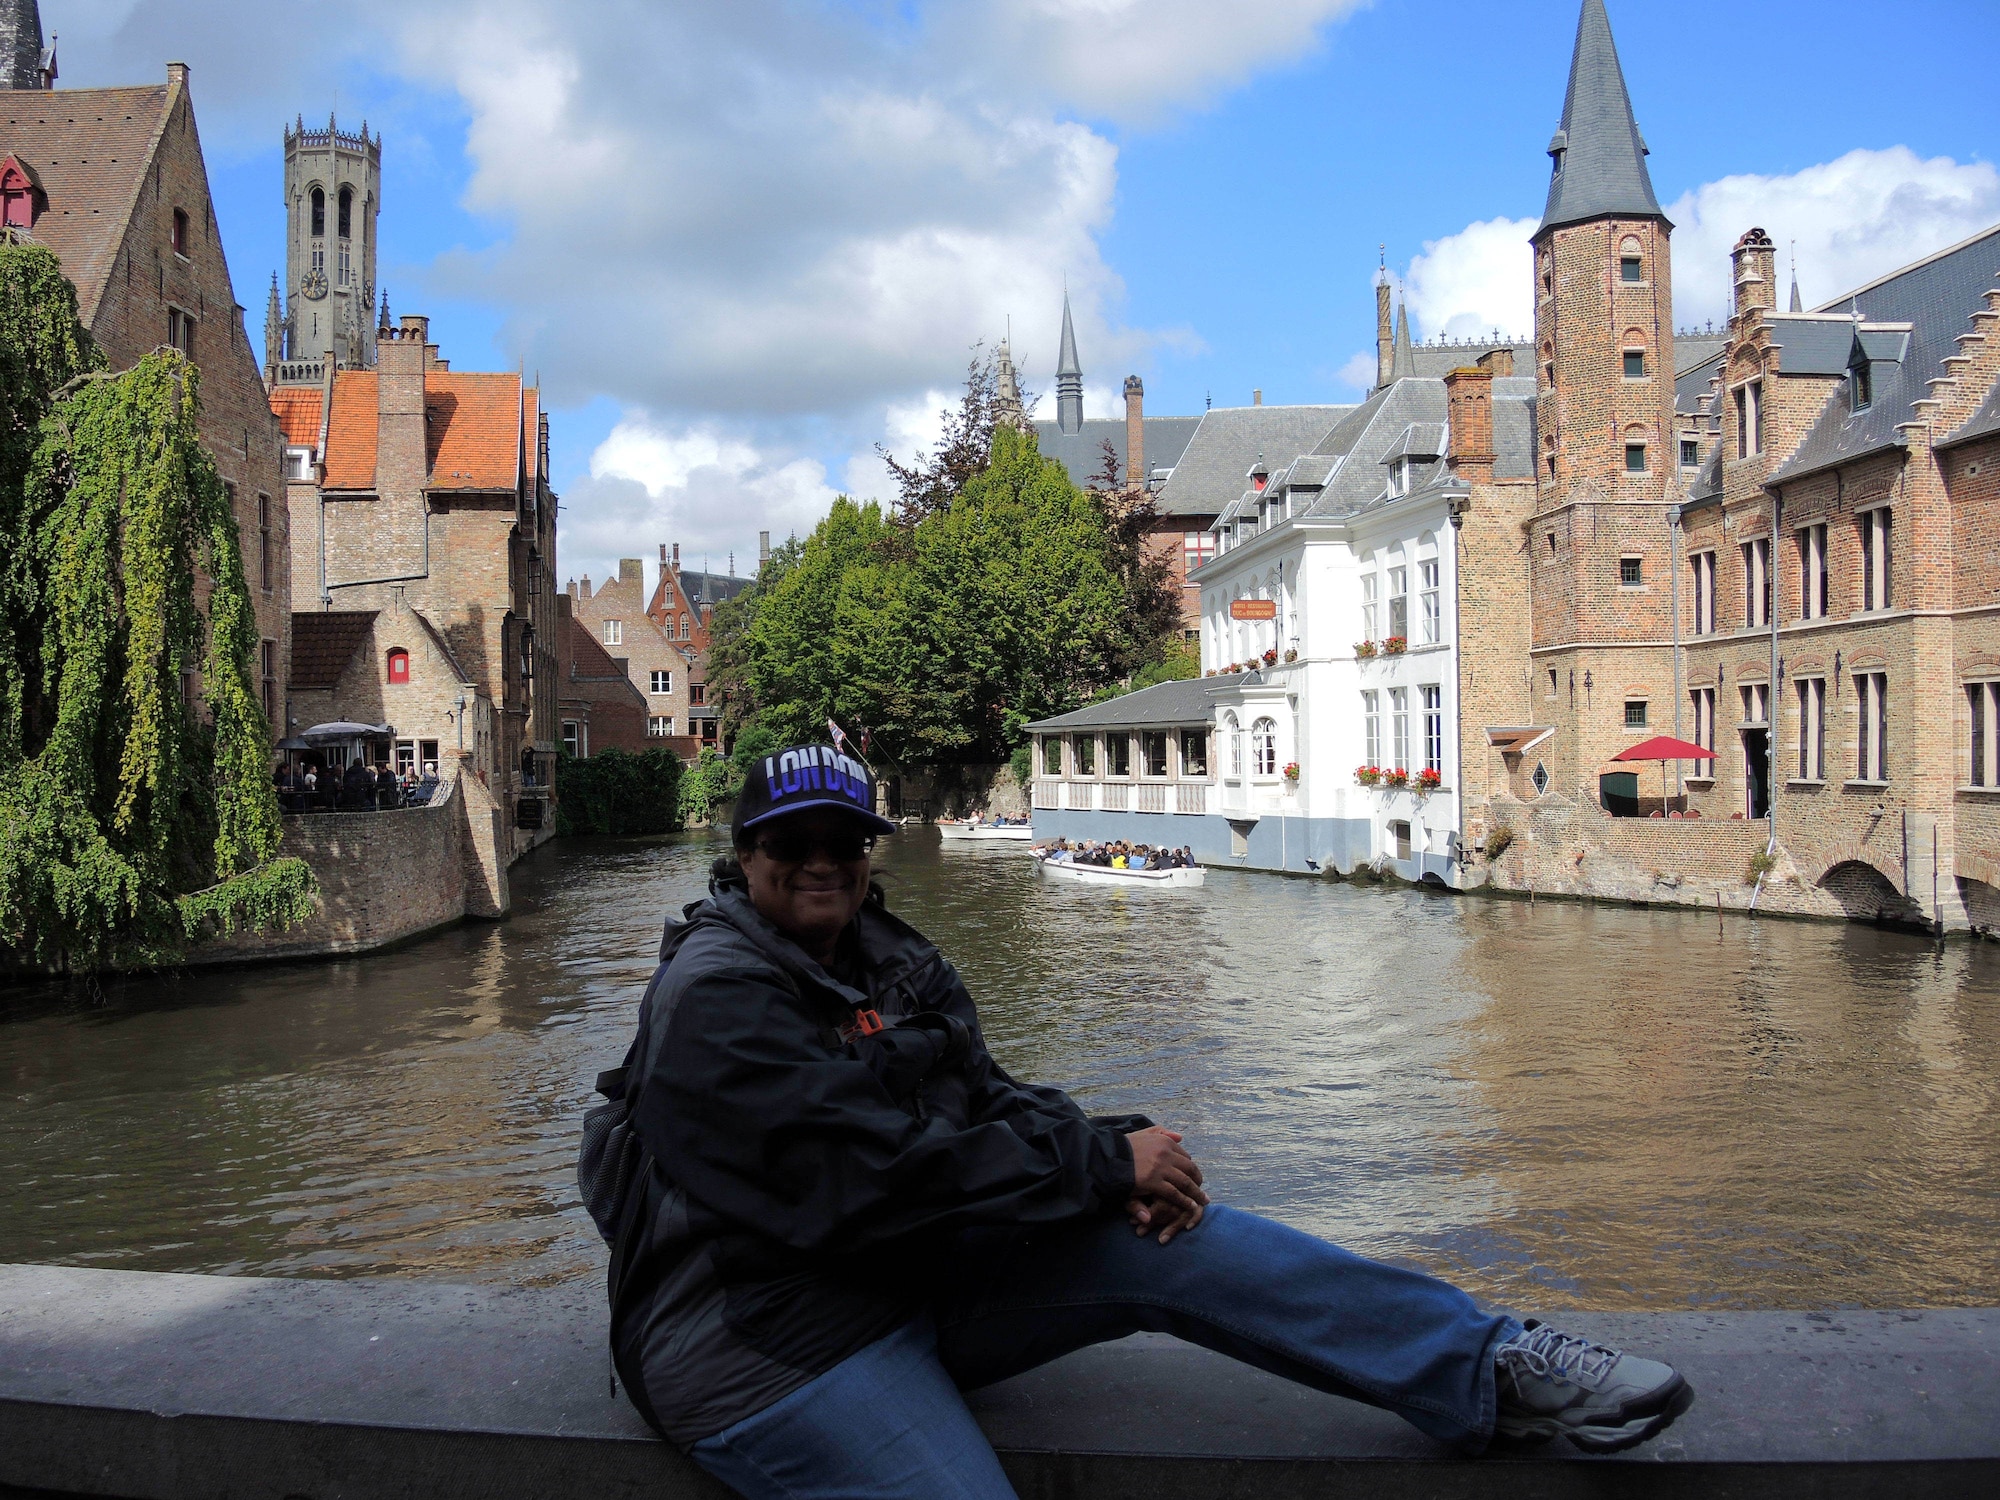 Candy Knight, Public Affairs Specialist for Headquarters Fourth Air Force, poses for a photo during a trip to Bruges, Belgium. (Courtesy photo by Candy Knight)